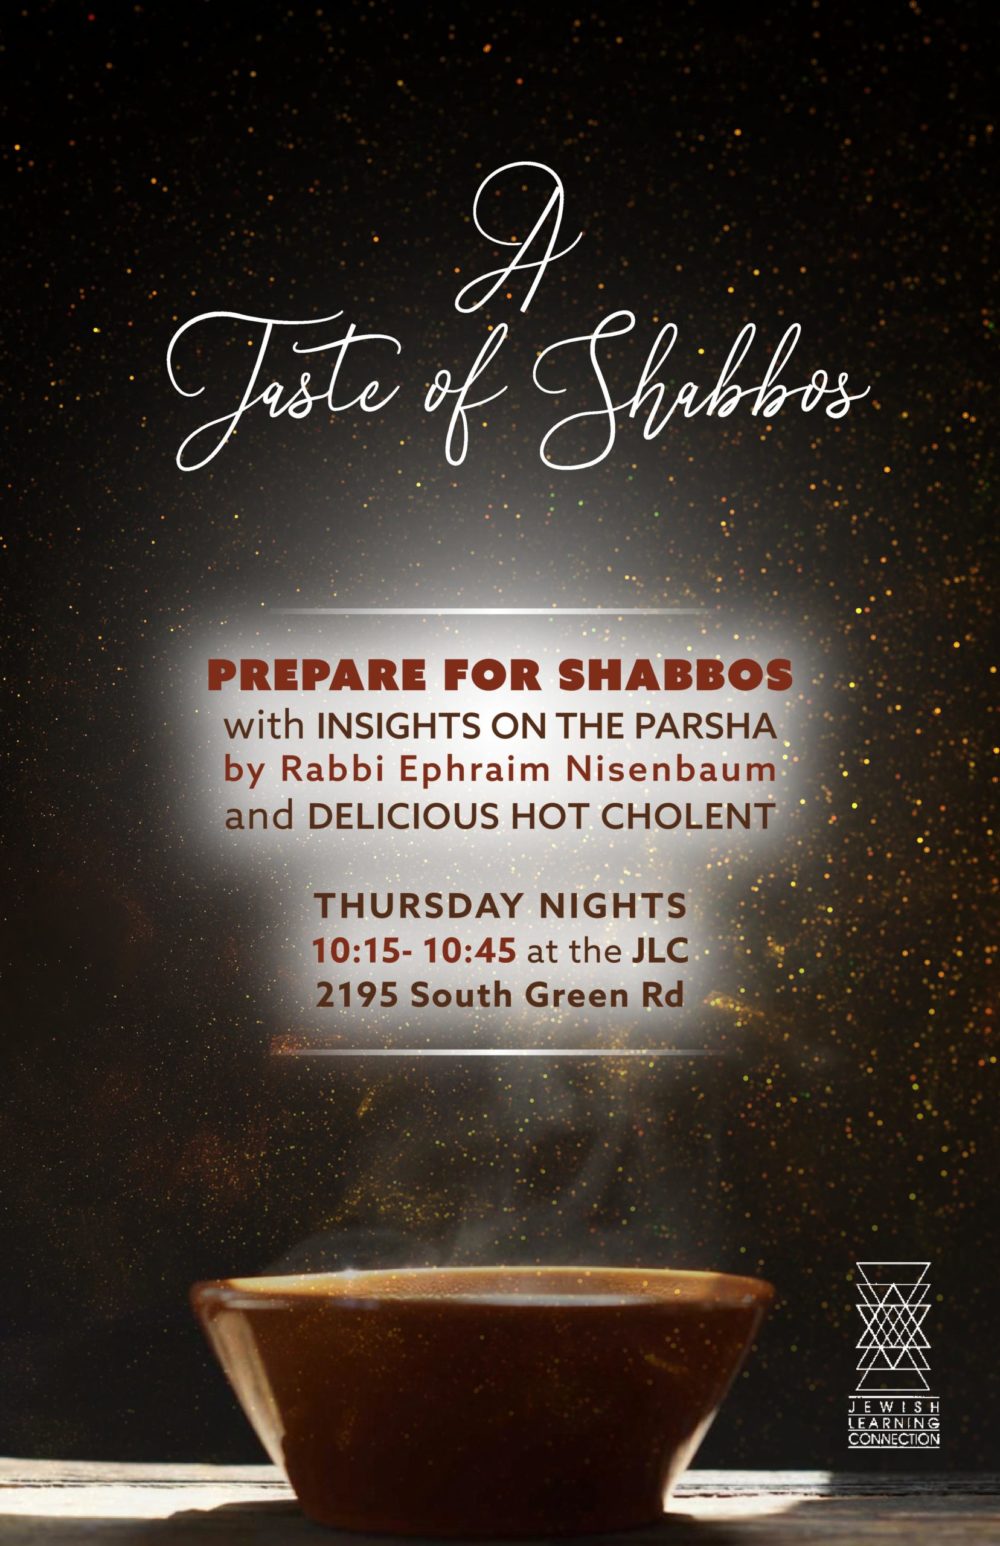 a taste of shabbos poster 7 26 2021 FINAL page 001 scaled e1627498932241